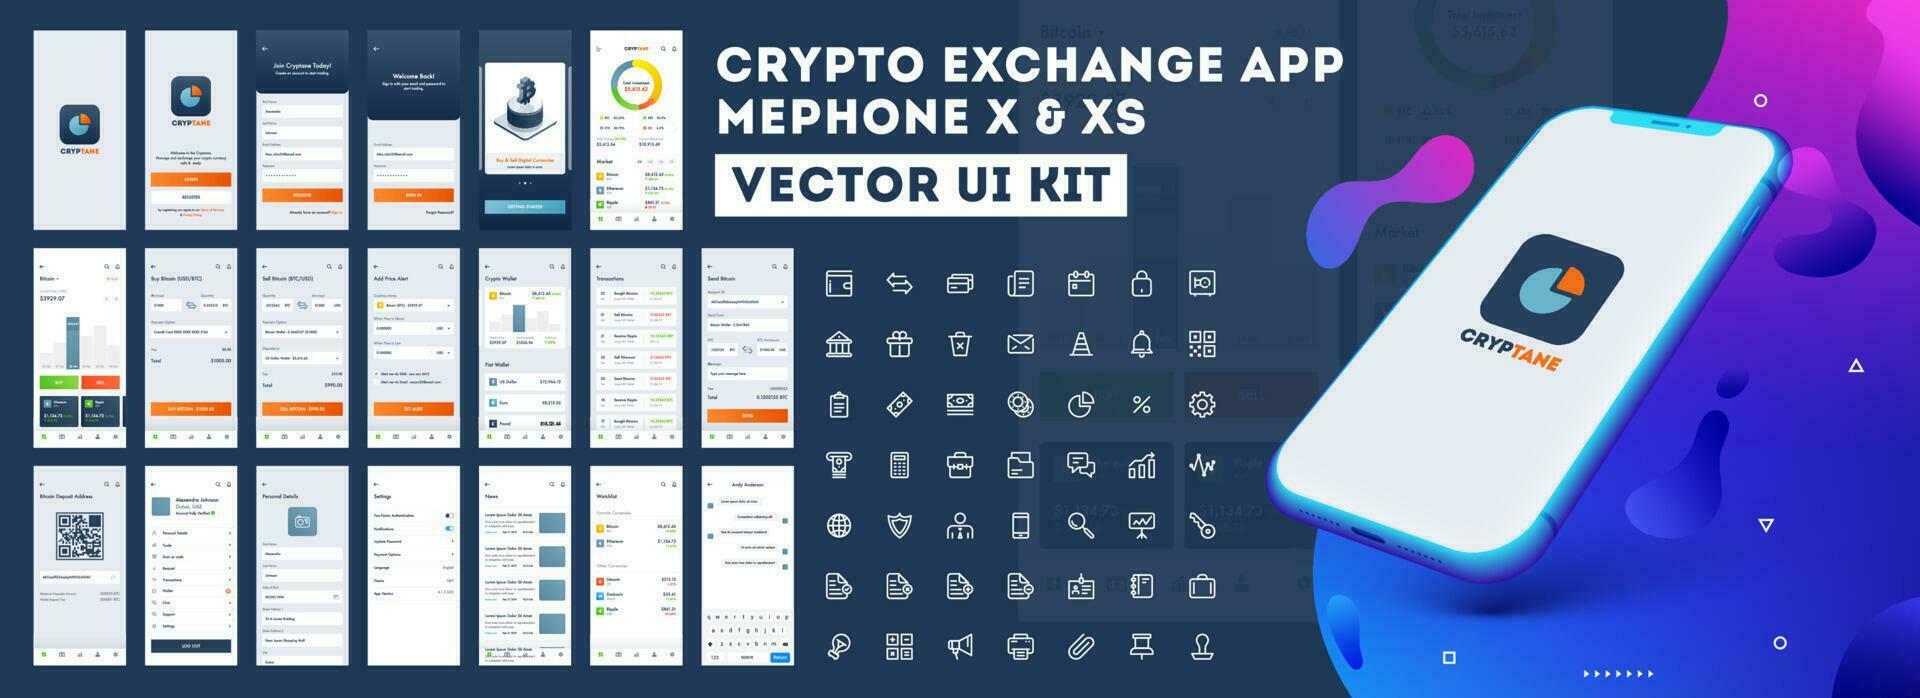 Crypto App UI Kit for responsive mobile app or website with different GUI layout including Login, Create Account, Profile, Transaction and trending screens. vector